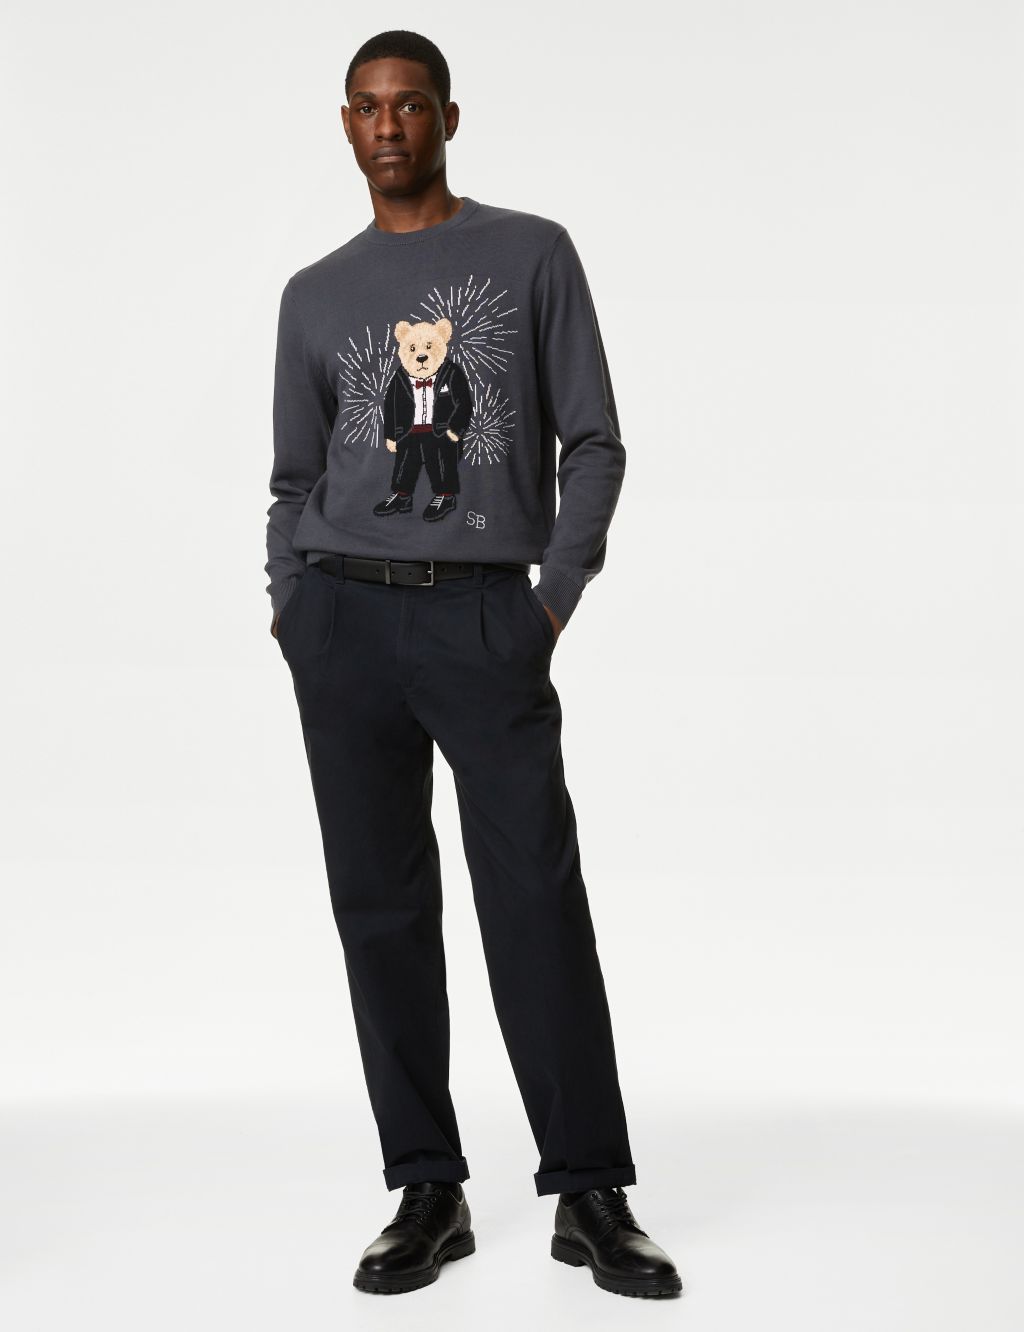 Pure Cotton Spencer Bear™ Christmas Jumper image 3